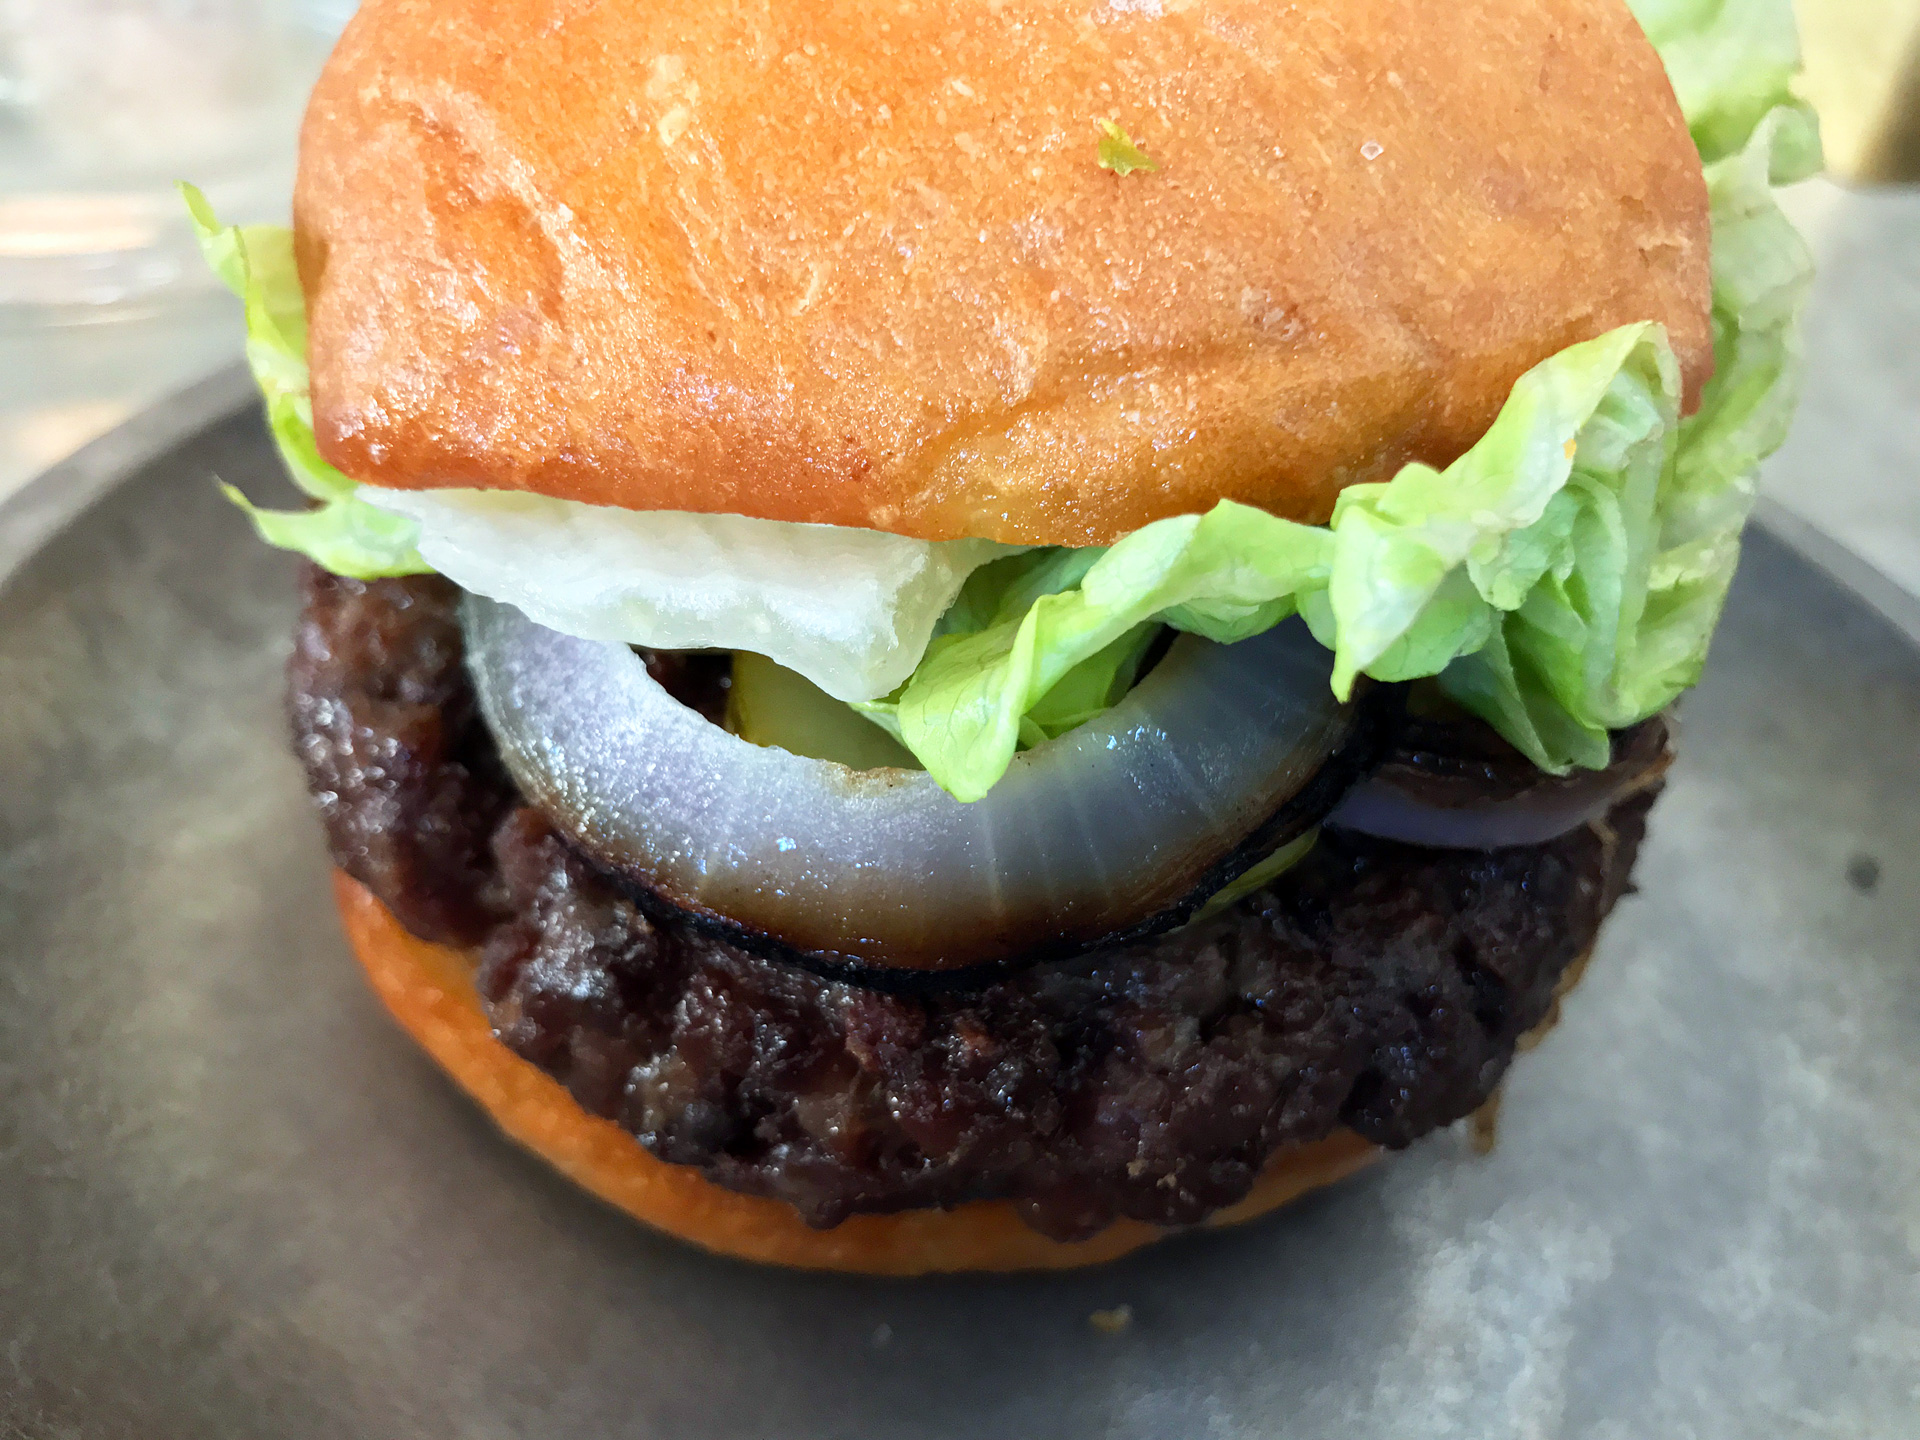 Chris Kronner’s famous KronnerBurger, which has taken the Bay Area by storm.